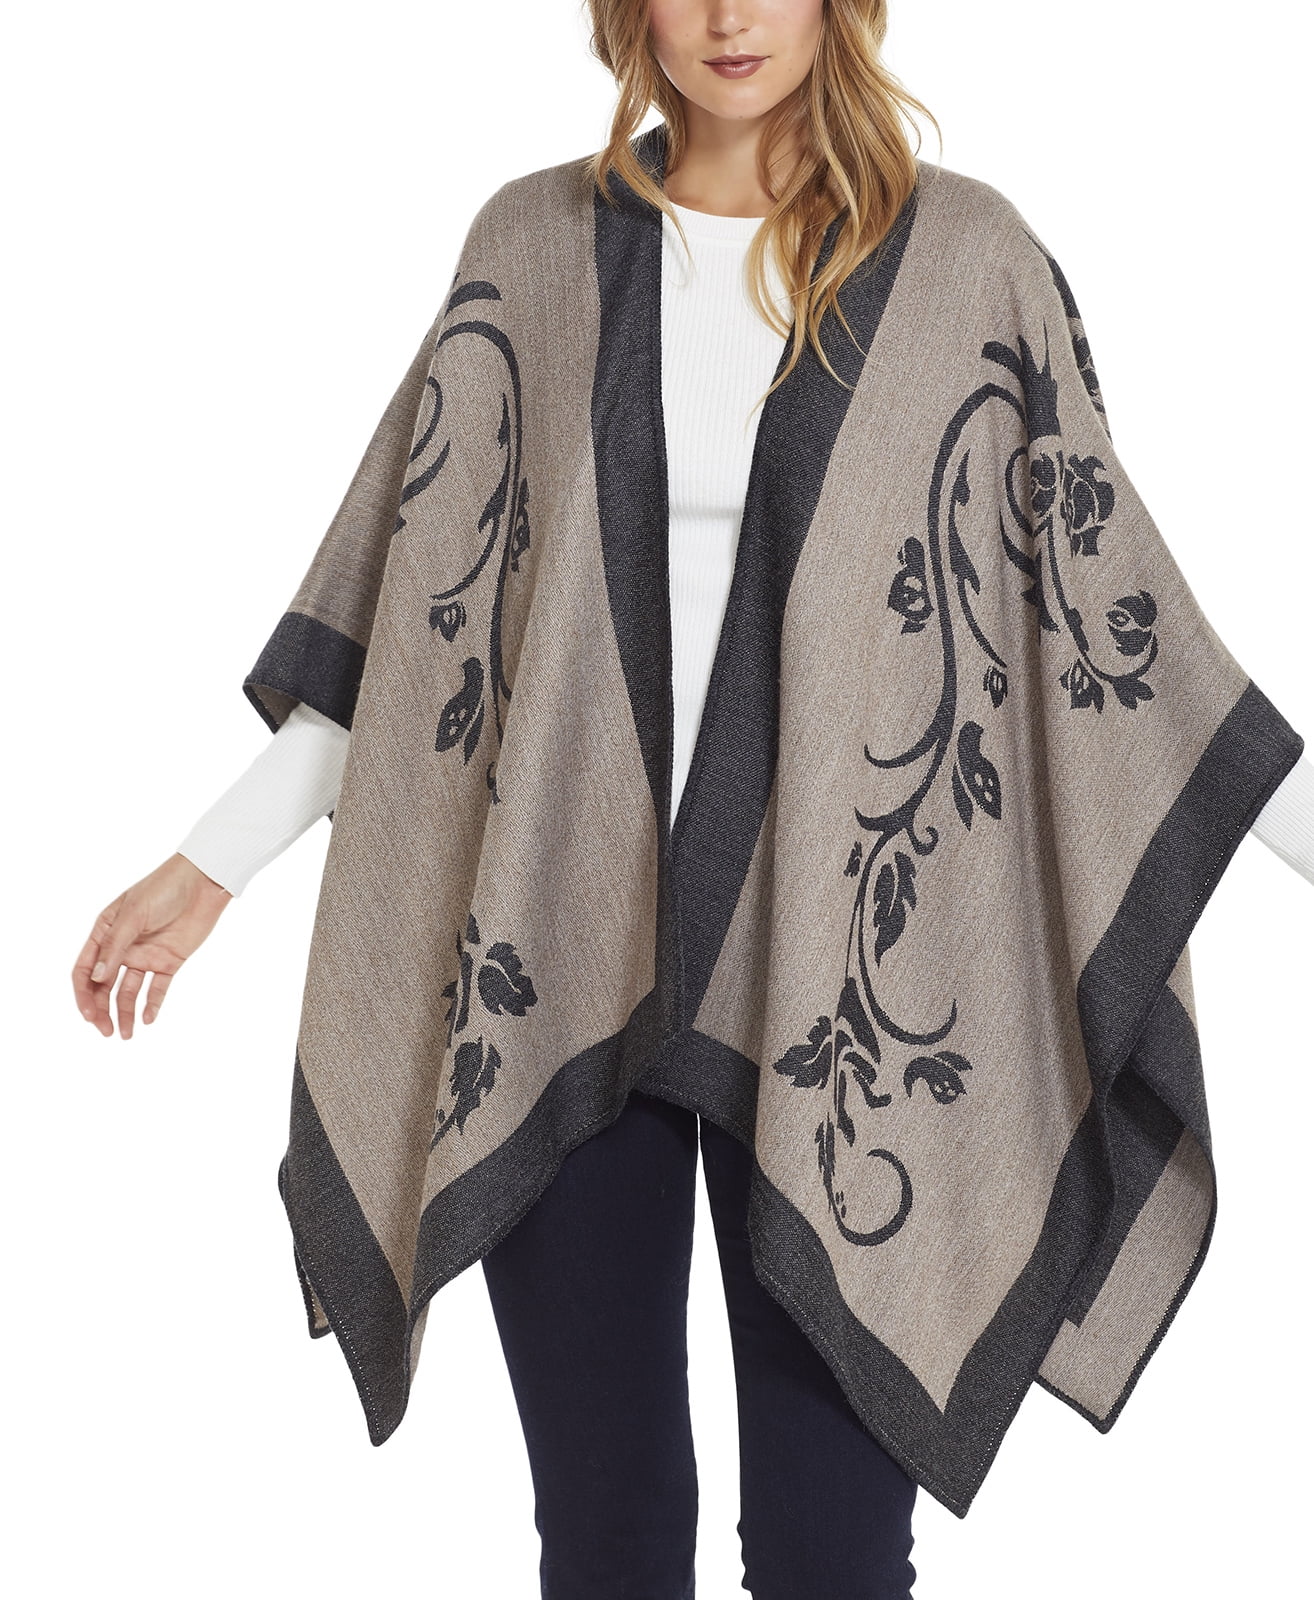 La Fiorentina Synthetic Bird Embroidered Poncho in Grey Grey Womens Clothing Jumpers and knitwear Ponchos and poncho dresses 